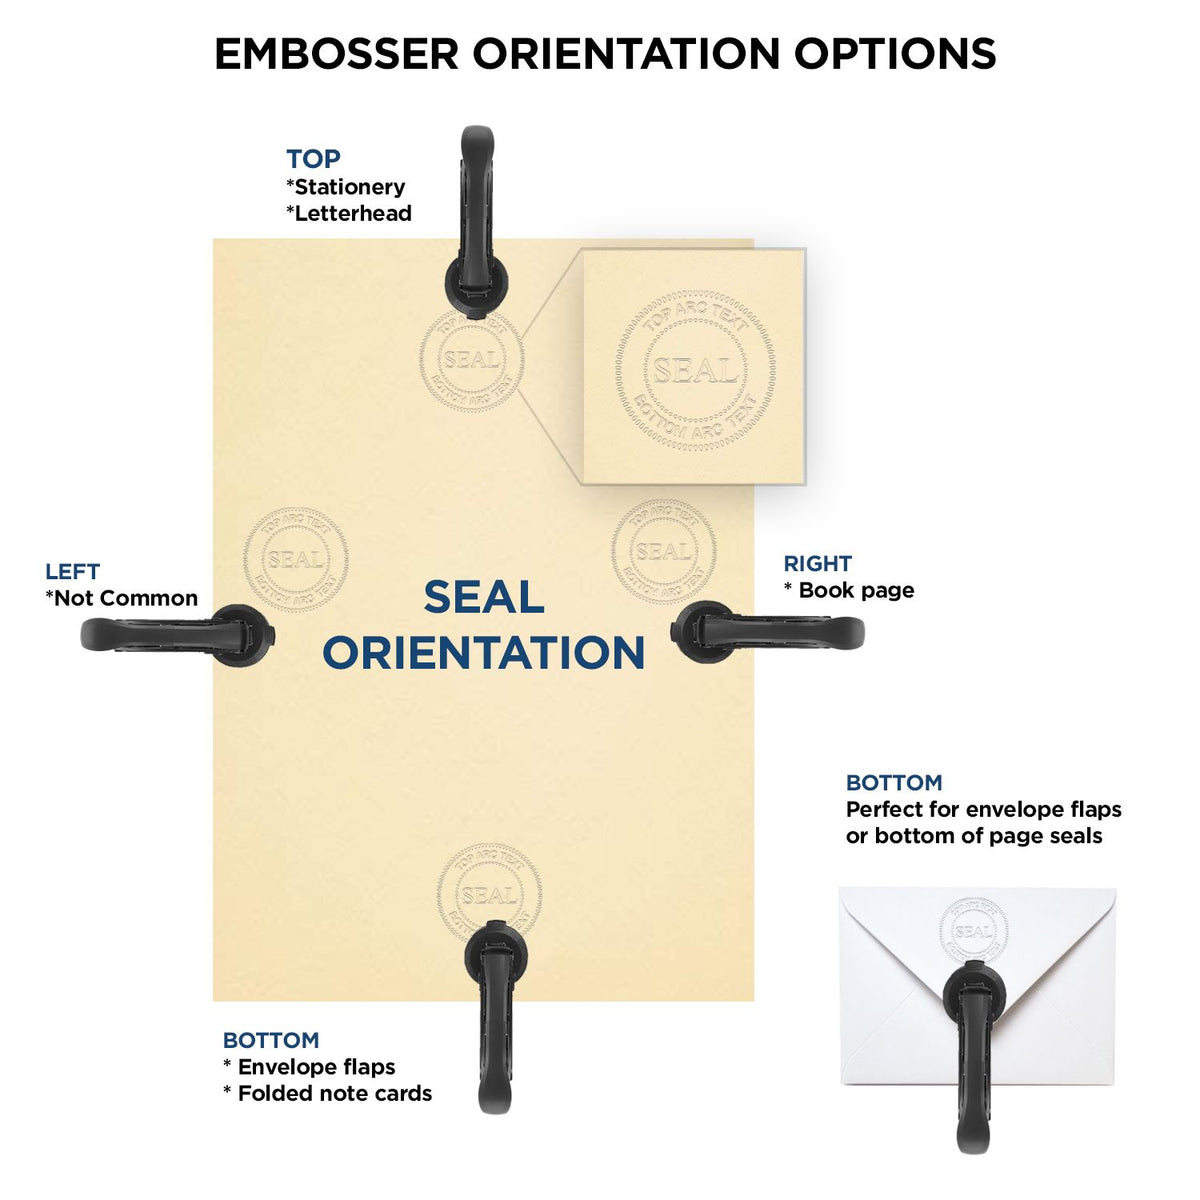 An infographic for the Long Reach Montana Land Surveyor Seal showing embosser orientation, this is showing examples of a top, bottom, right and left insert.